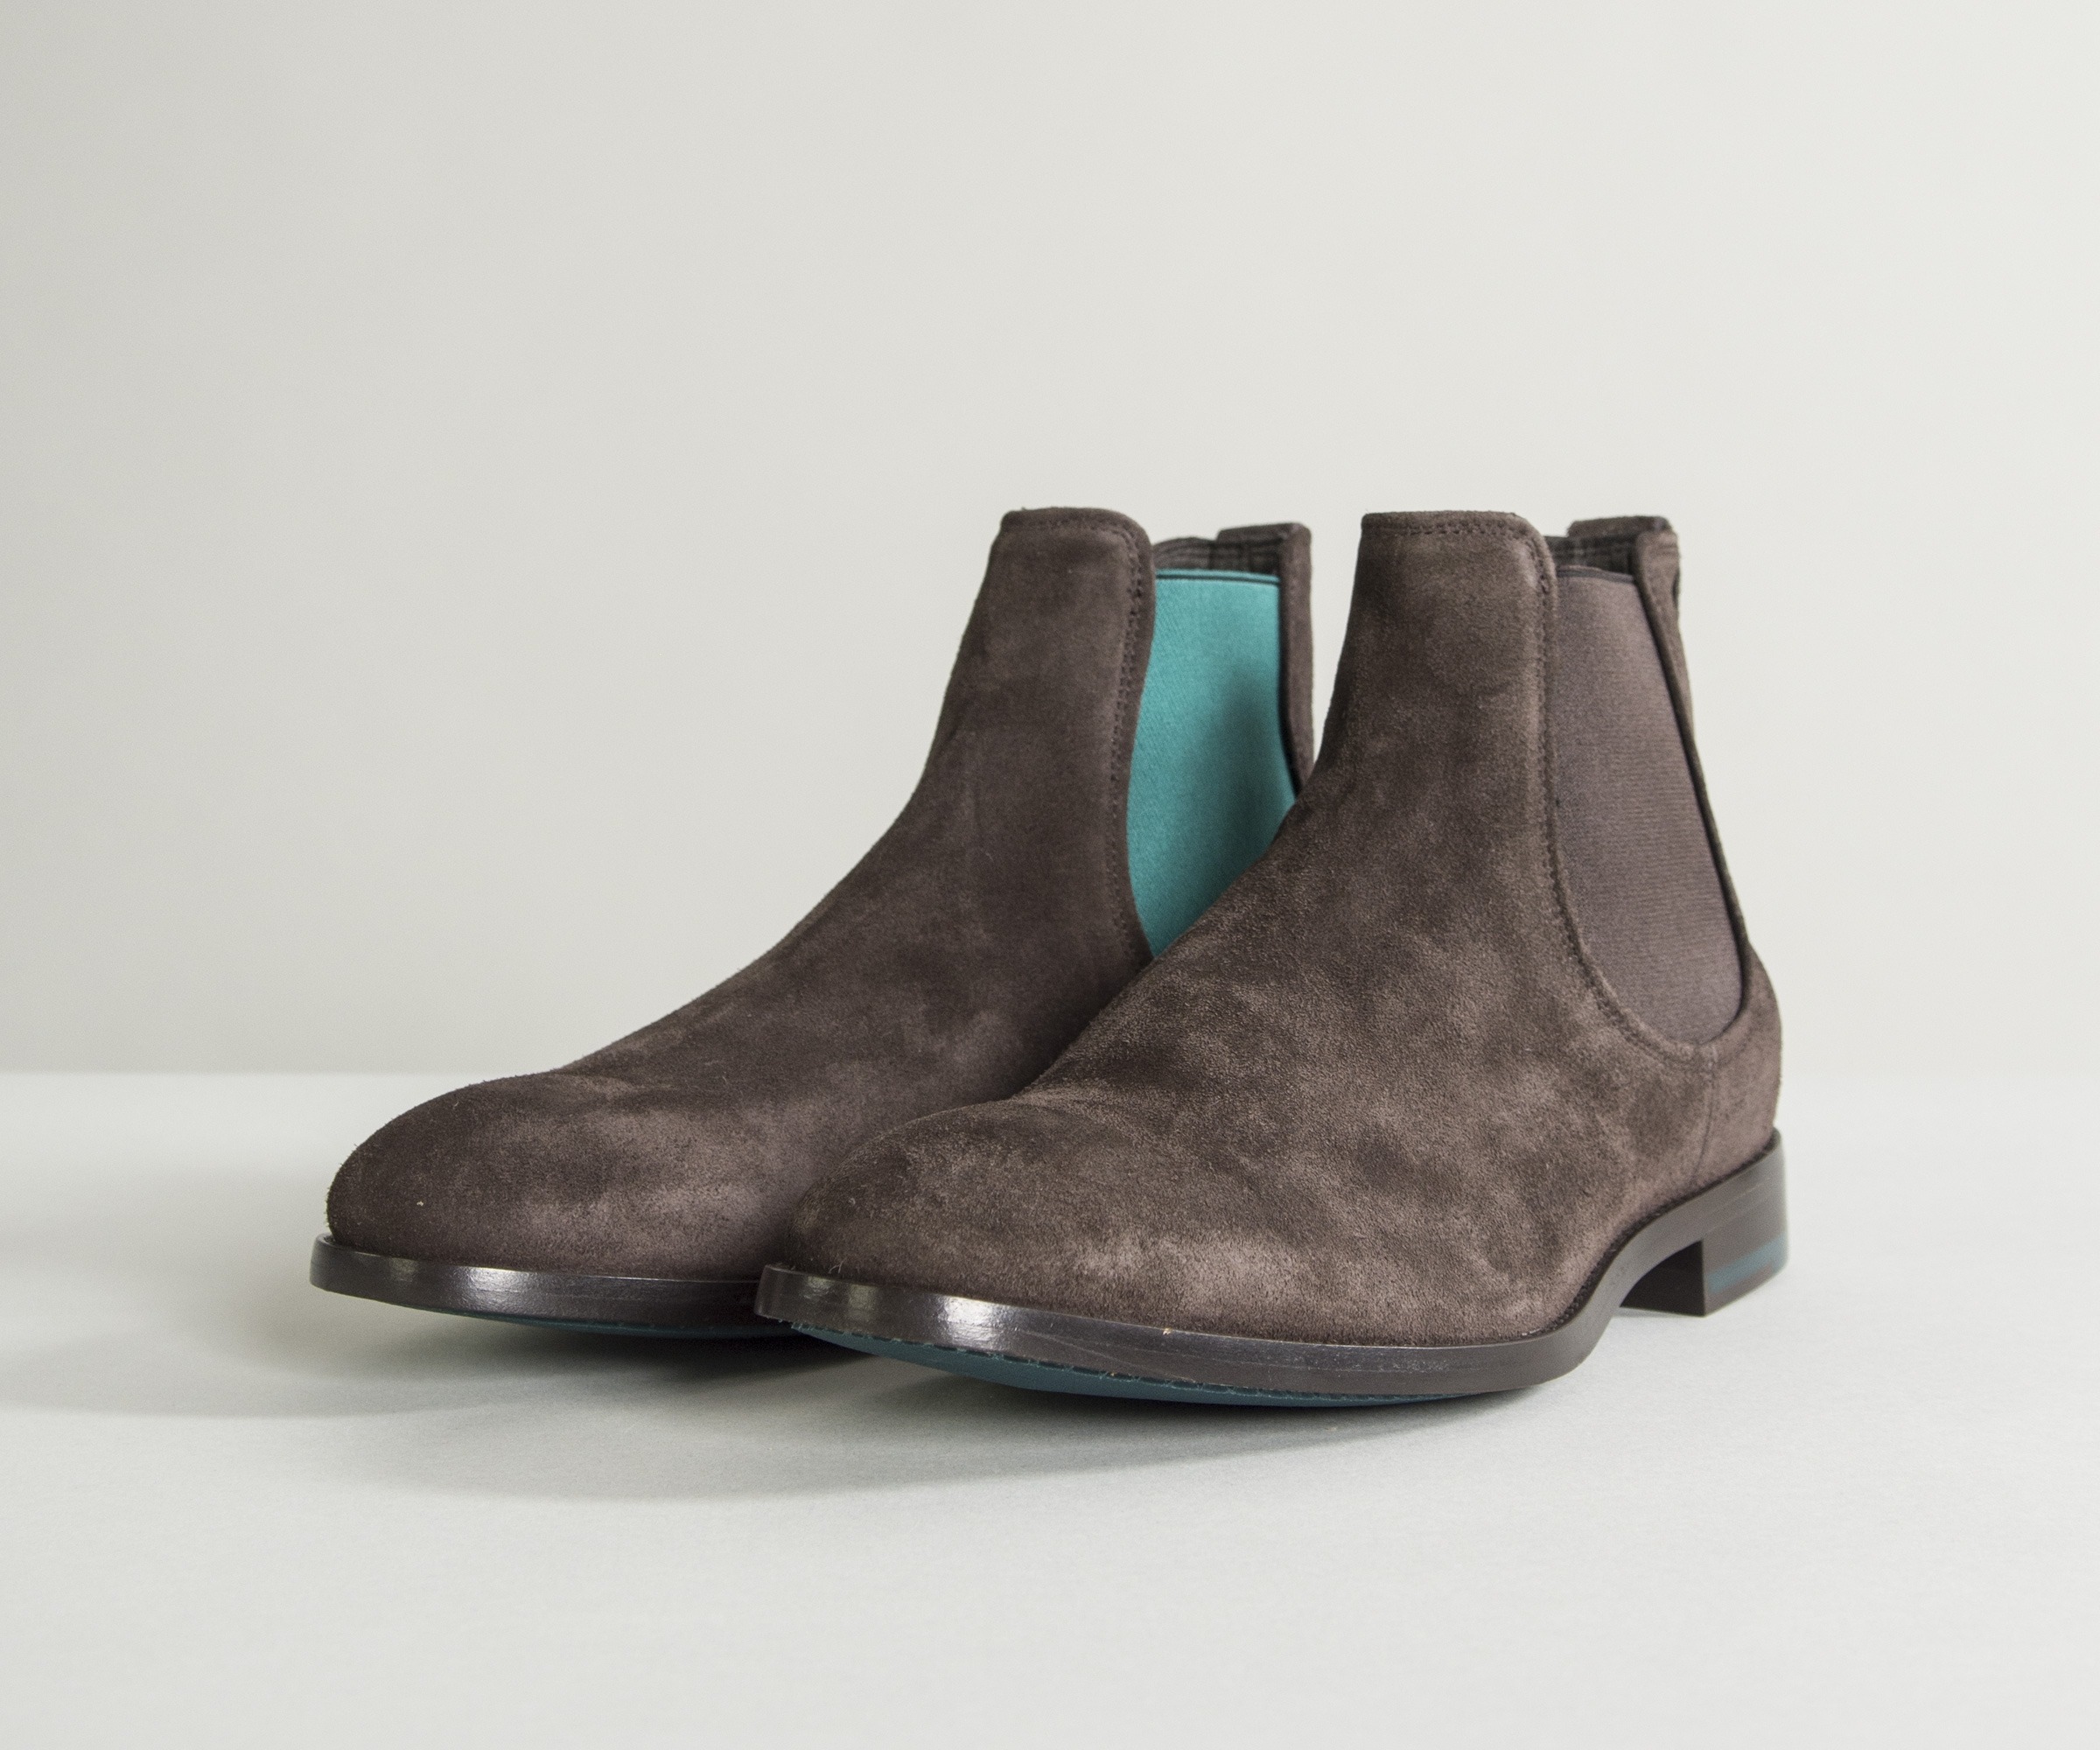 Paul Smith Shoes Suede 'Myron' Chelsea Boot Dark Brown